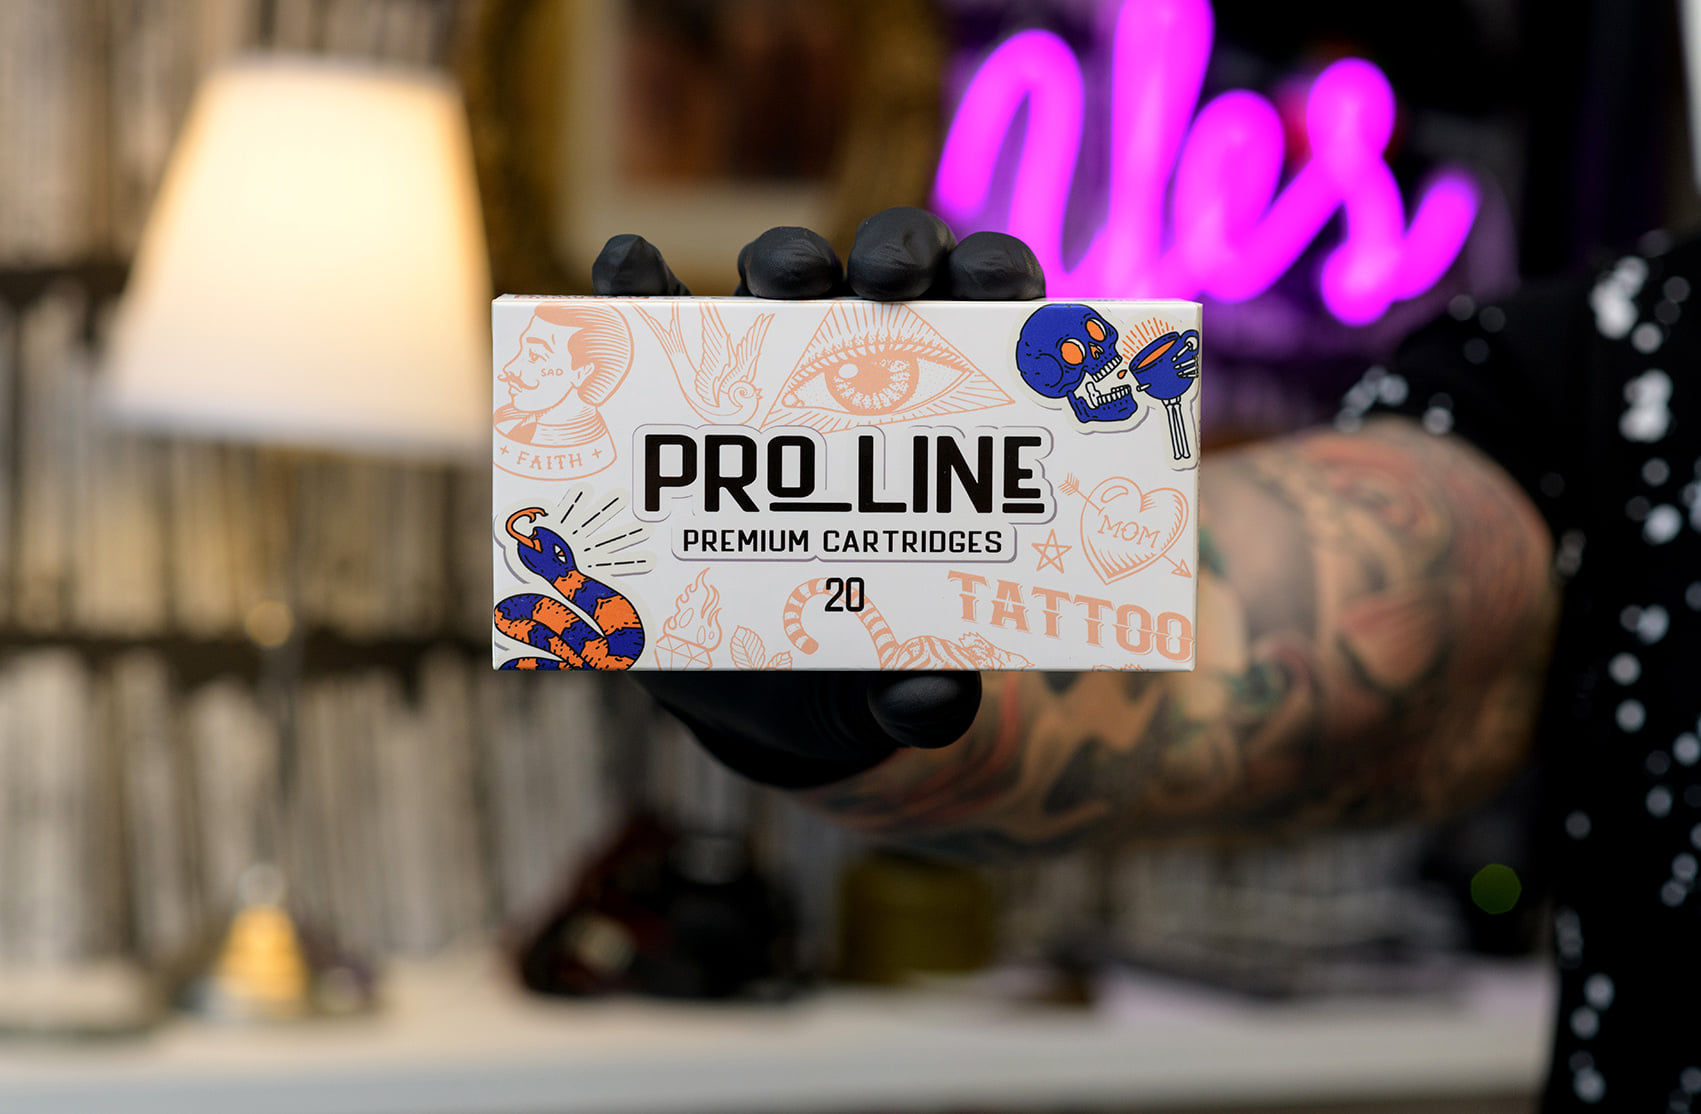 Photograph of a hand wearing black gloves holding a box filled with Pro Line Cartridges brand cartridges. The box is positioned in the center of the photo, with the cartridges visible inside. The background behind the box is blurred, emphasizing the focus on the product being held.